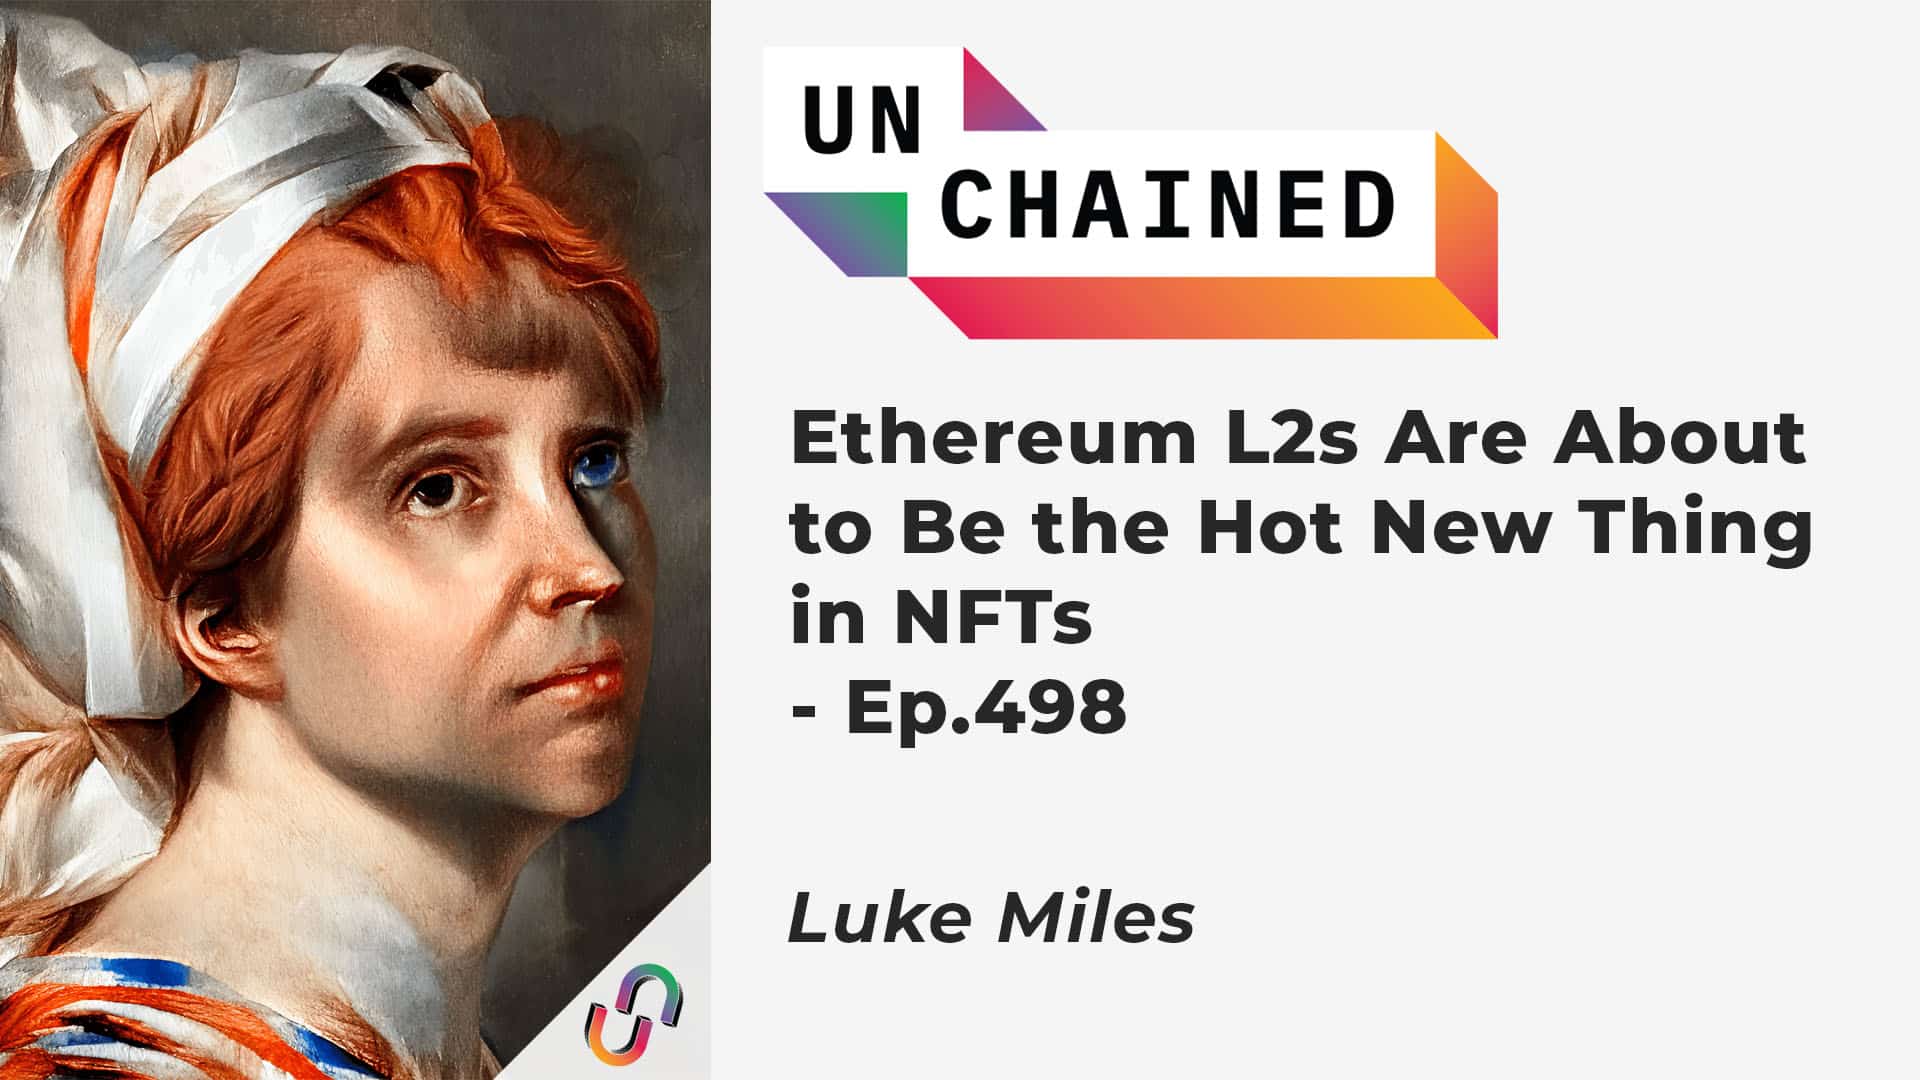 Ethereum L2s Are About to Be the Hot New Thing in NFTs - Ep.498